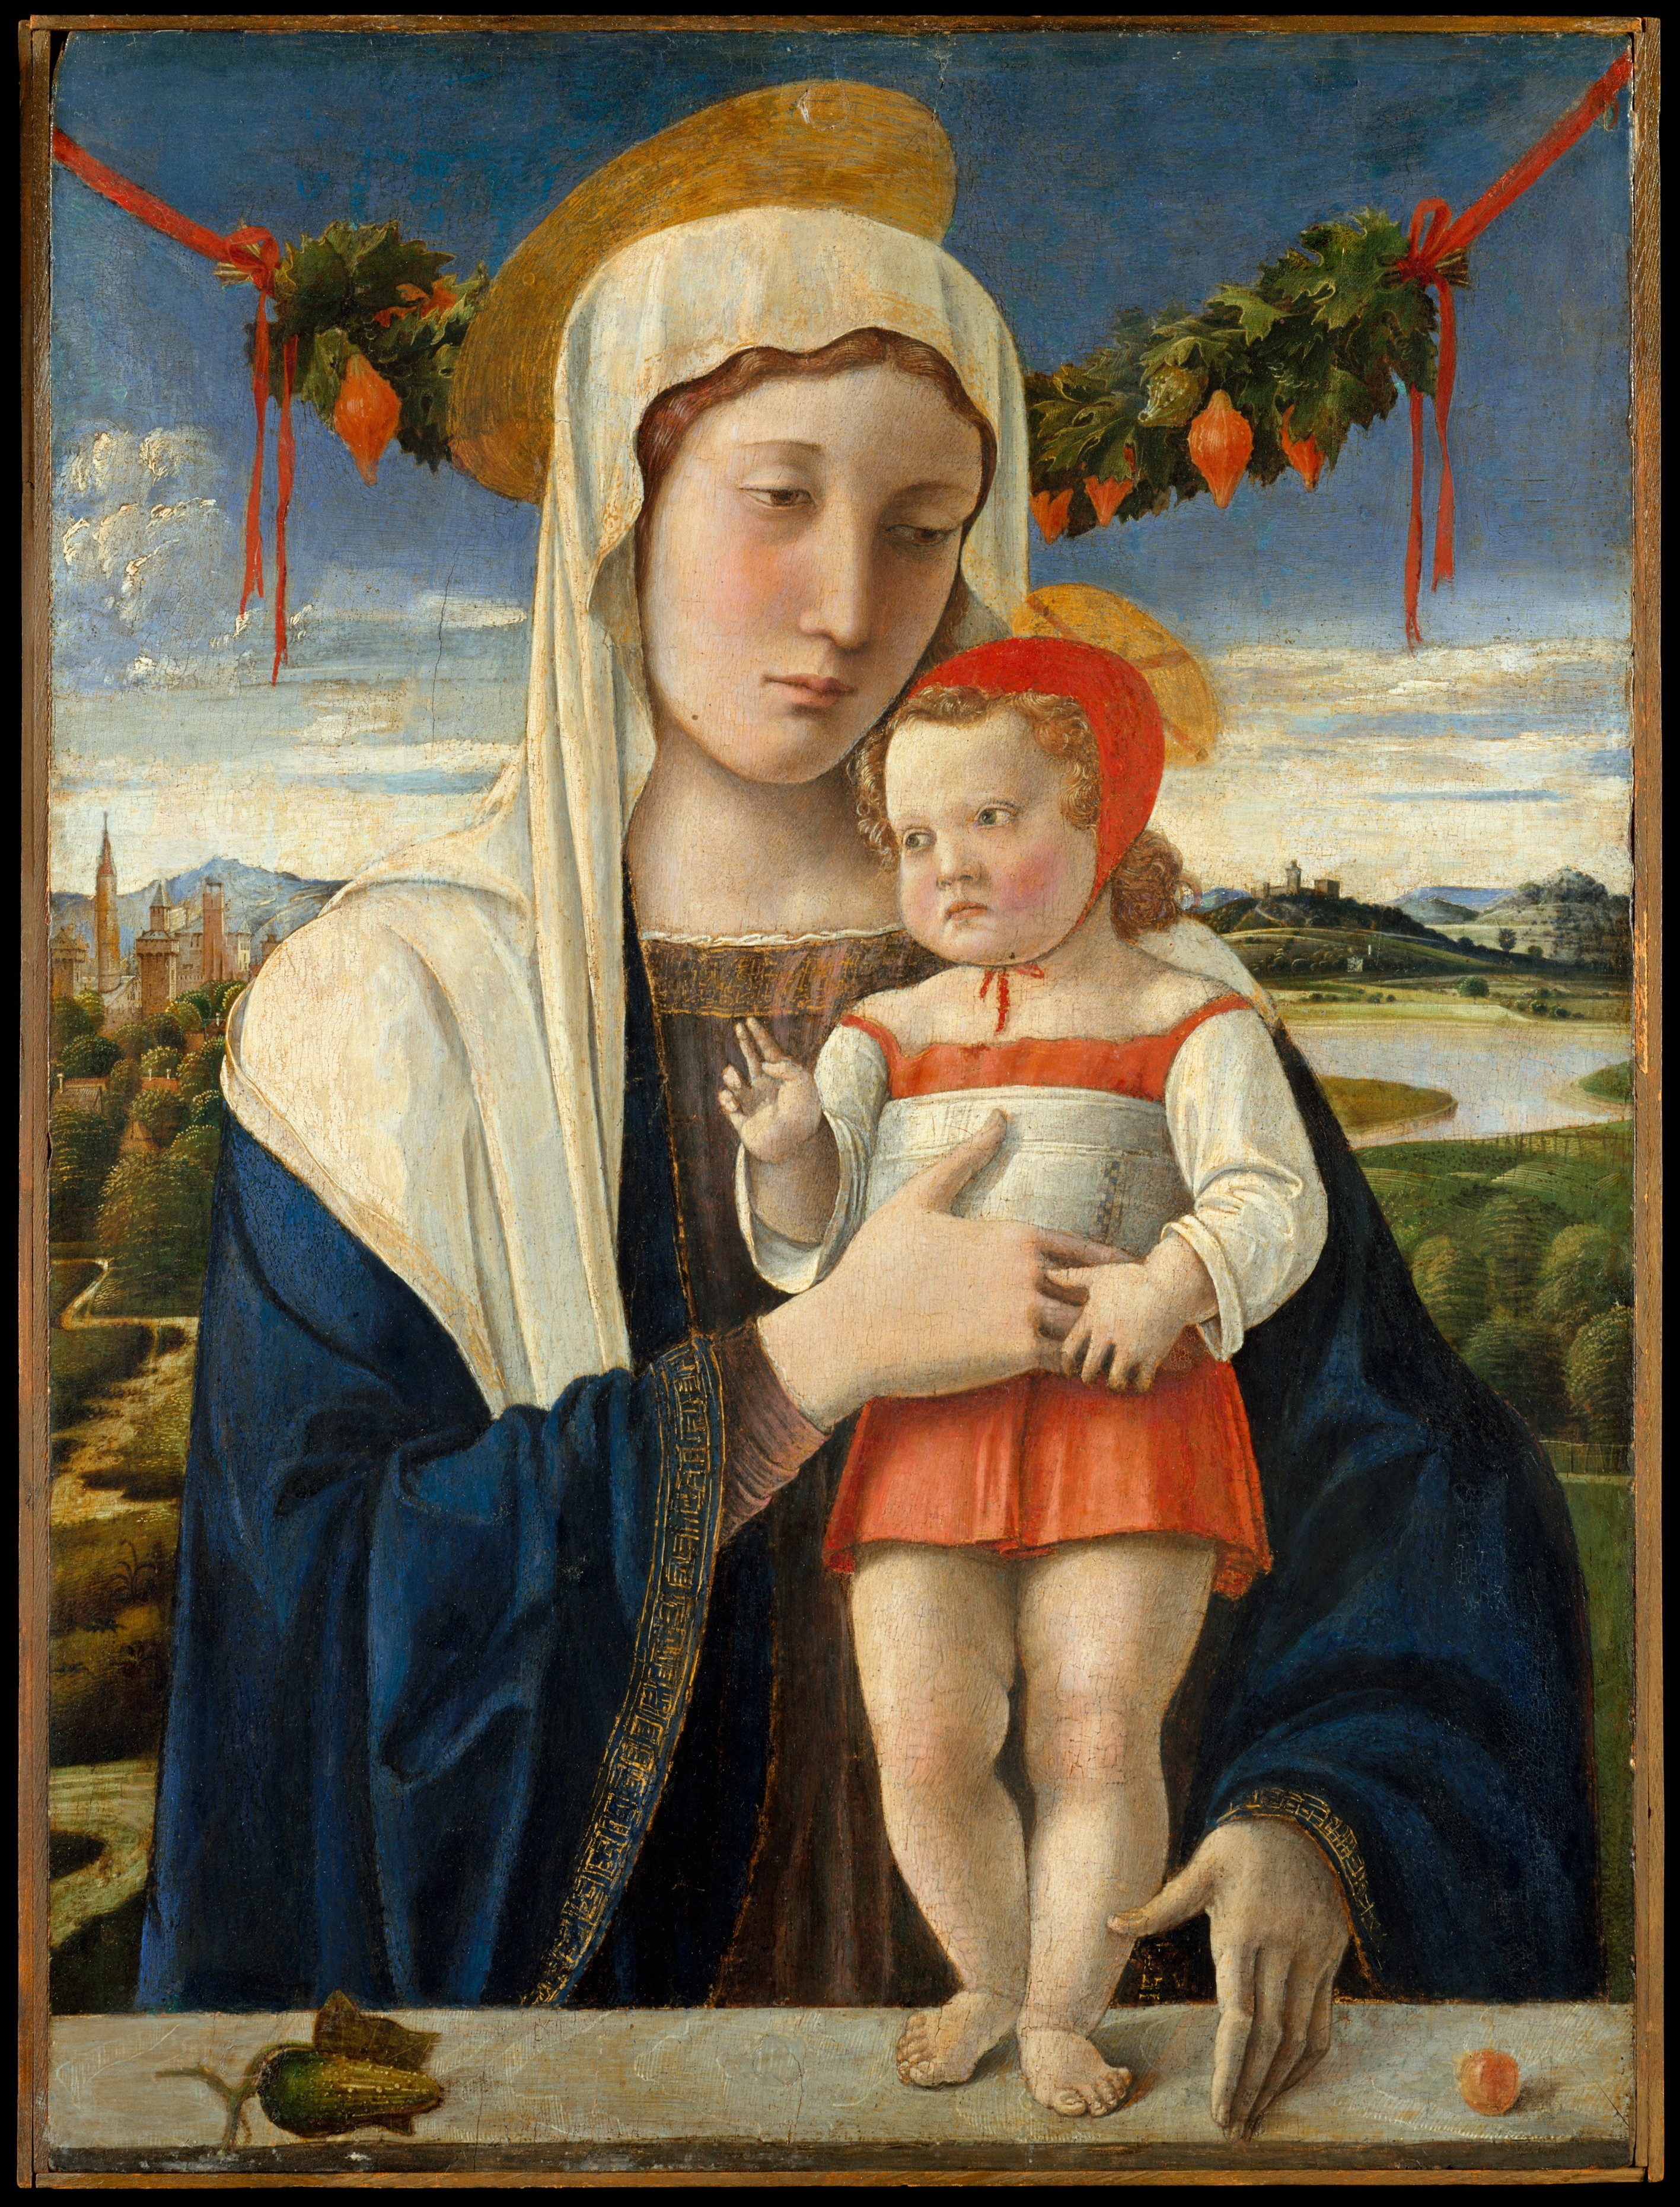 Madonna and Child by Giovanni Bellini - ca. 1470 - 54 x 40 cm Metropolitan Museum of Art